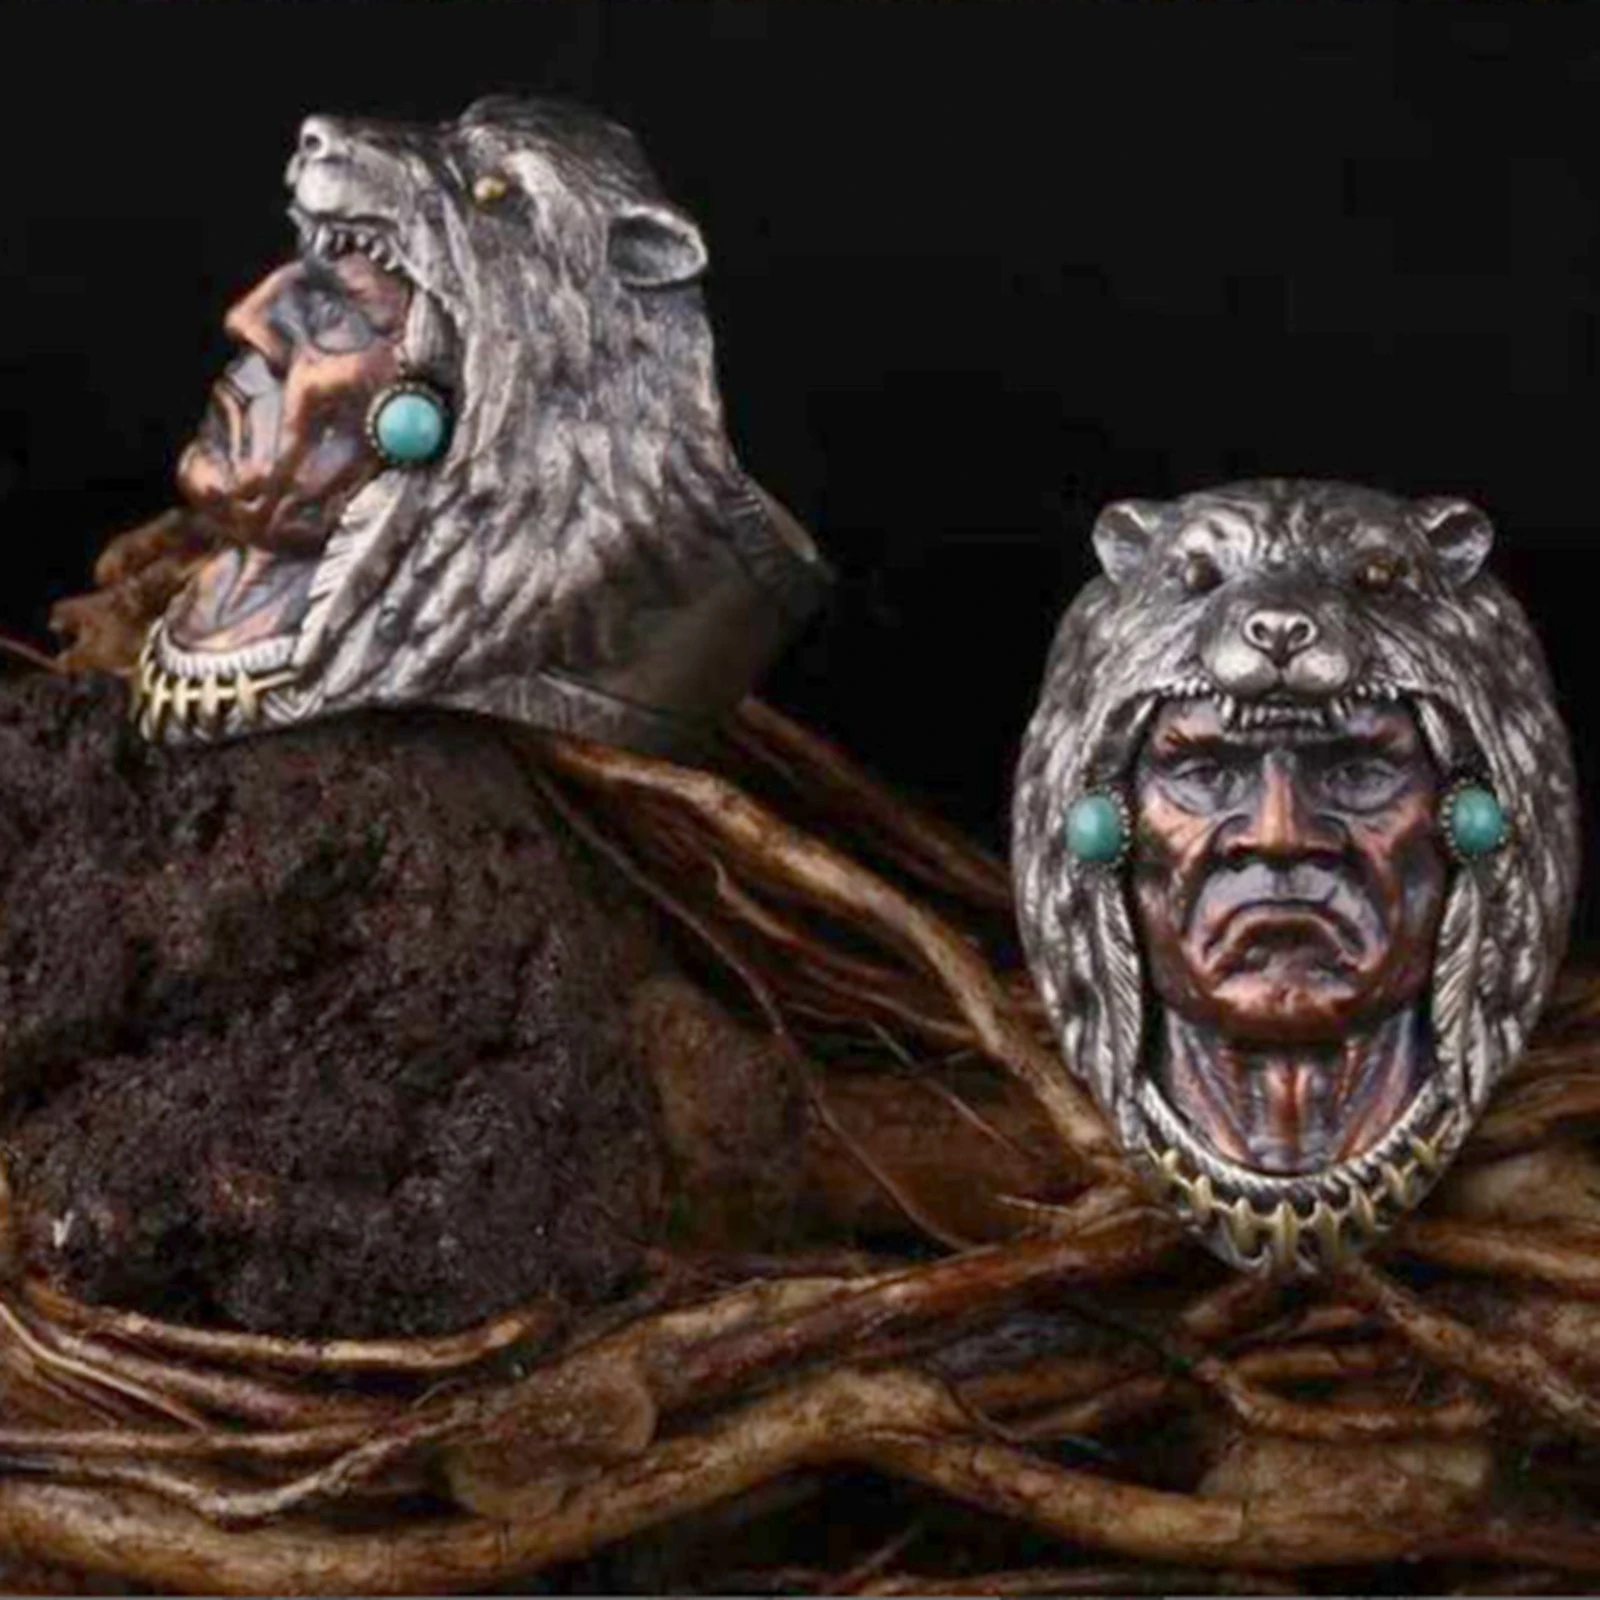 Men's Ring Hip Hop Punk Retro Indian Werewolf Tribal Chief Rings Jewelry